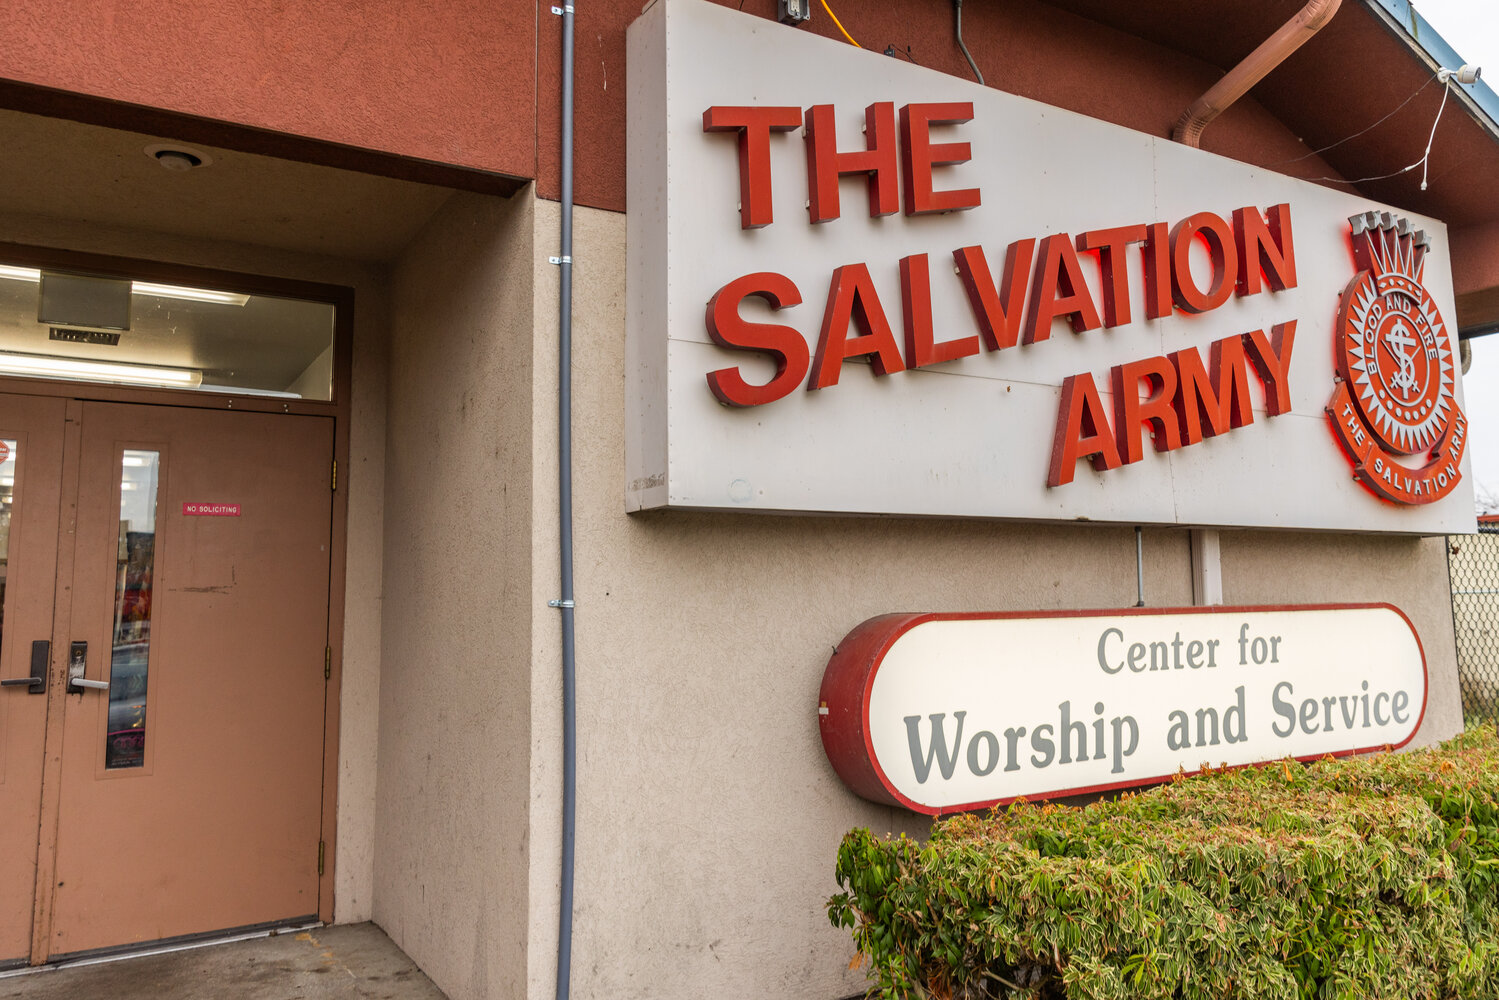 Residents of the Centralia Manor Apartments were evacuated to The Salvation Army on Wednesday, Nov. 29.